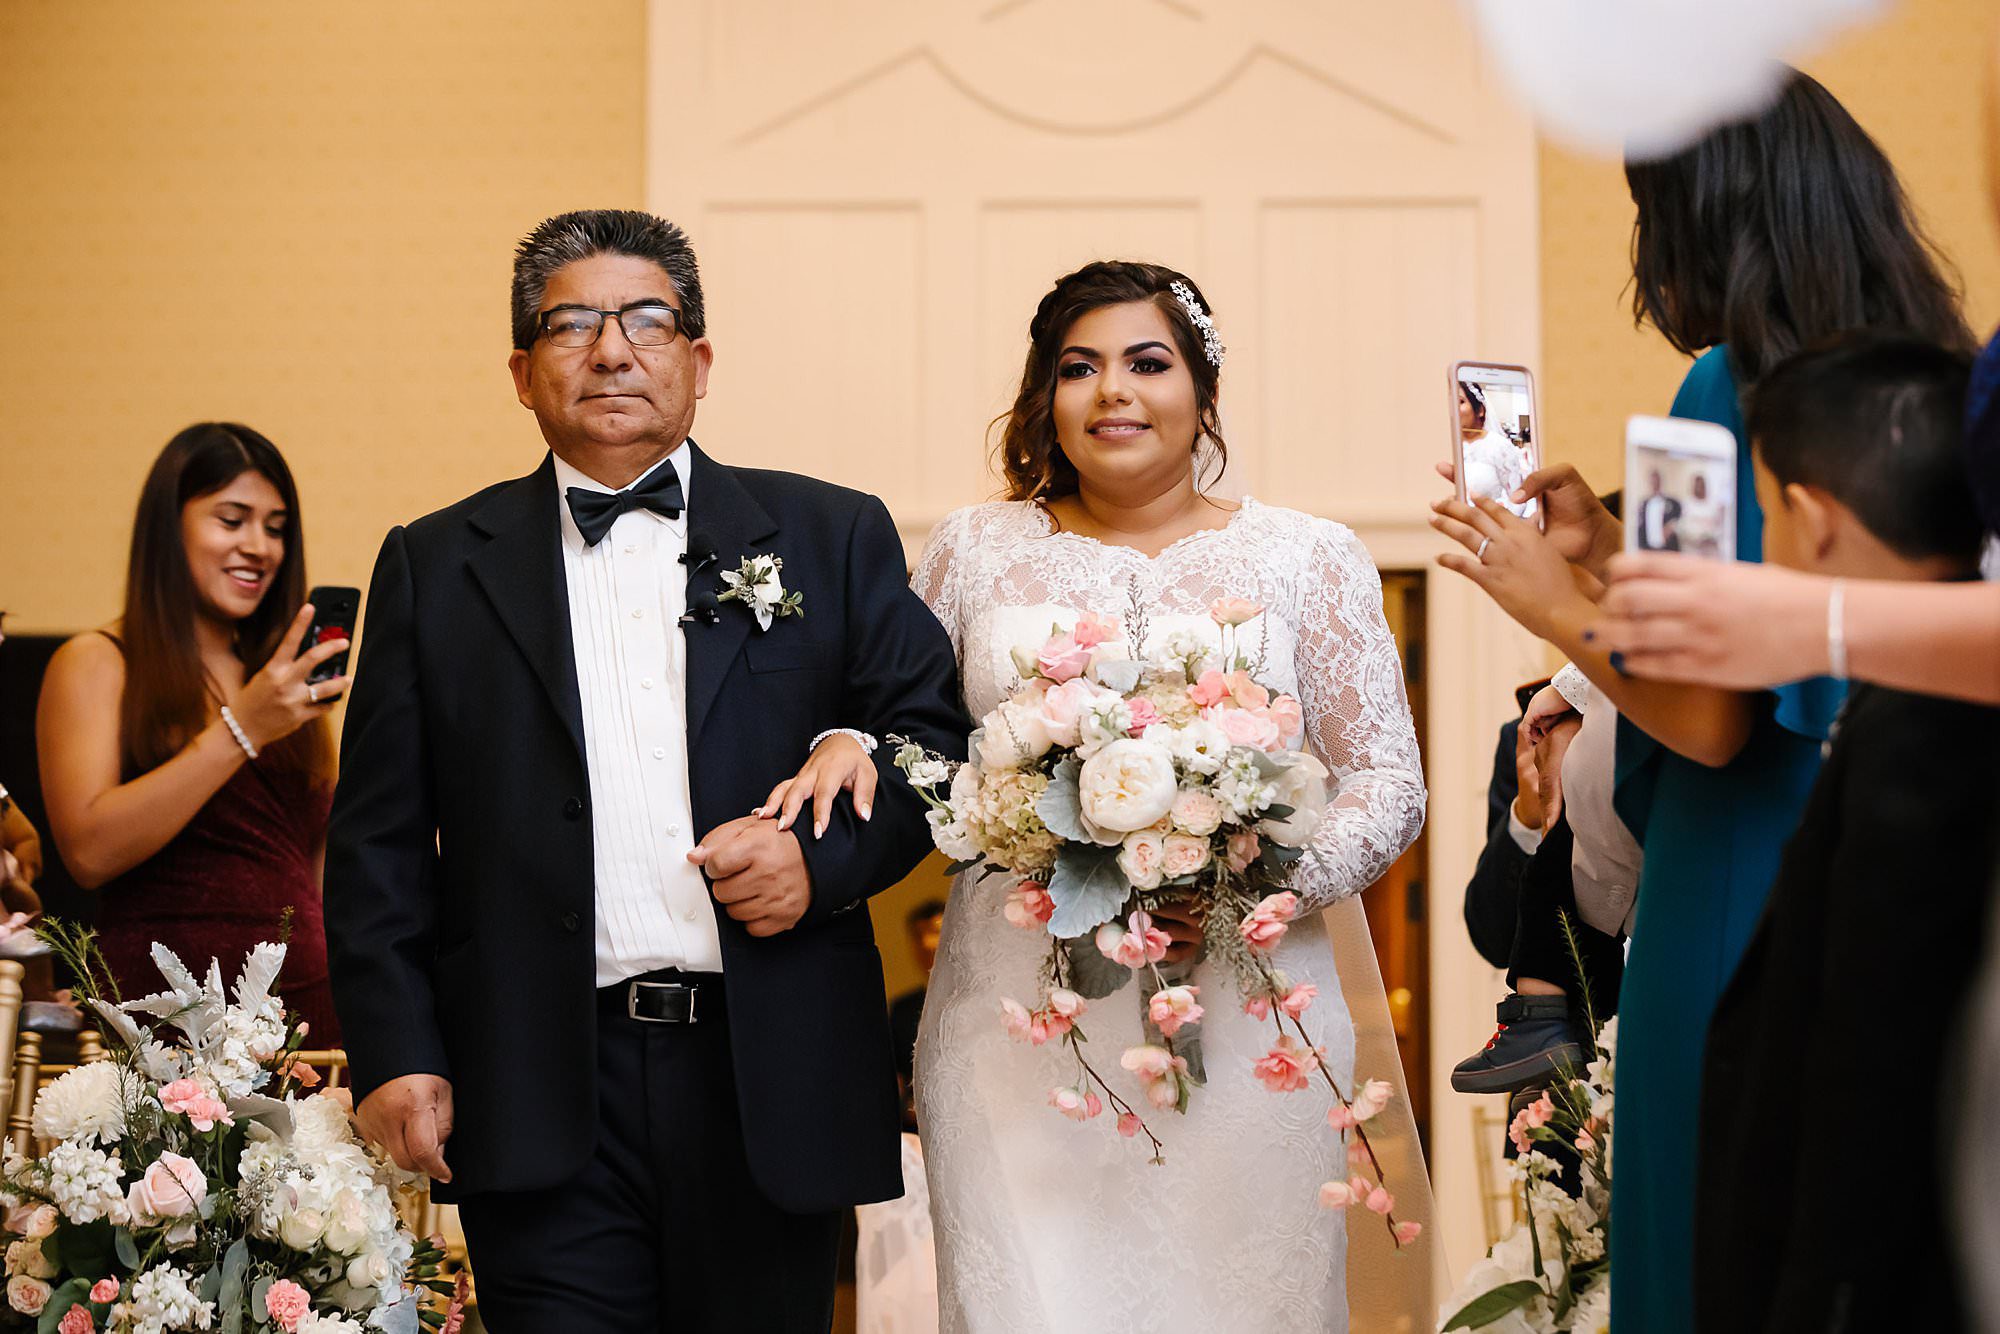 Bride and her father walking down the aisle at their indoor wedding at Henderson Beach Resort and Spa